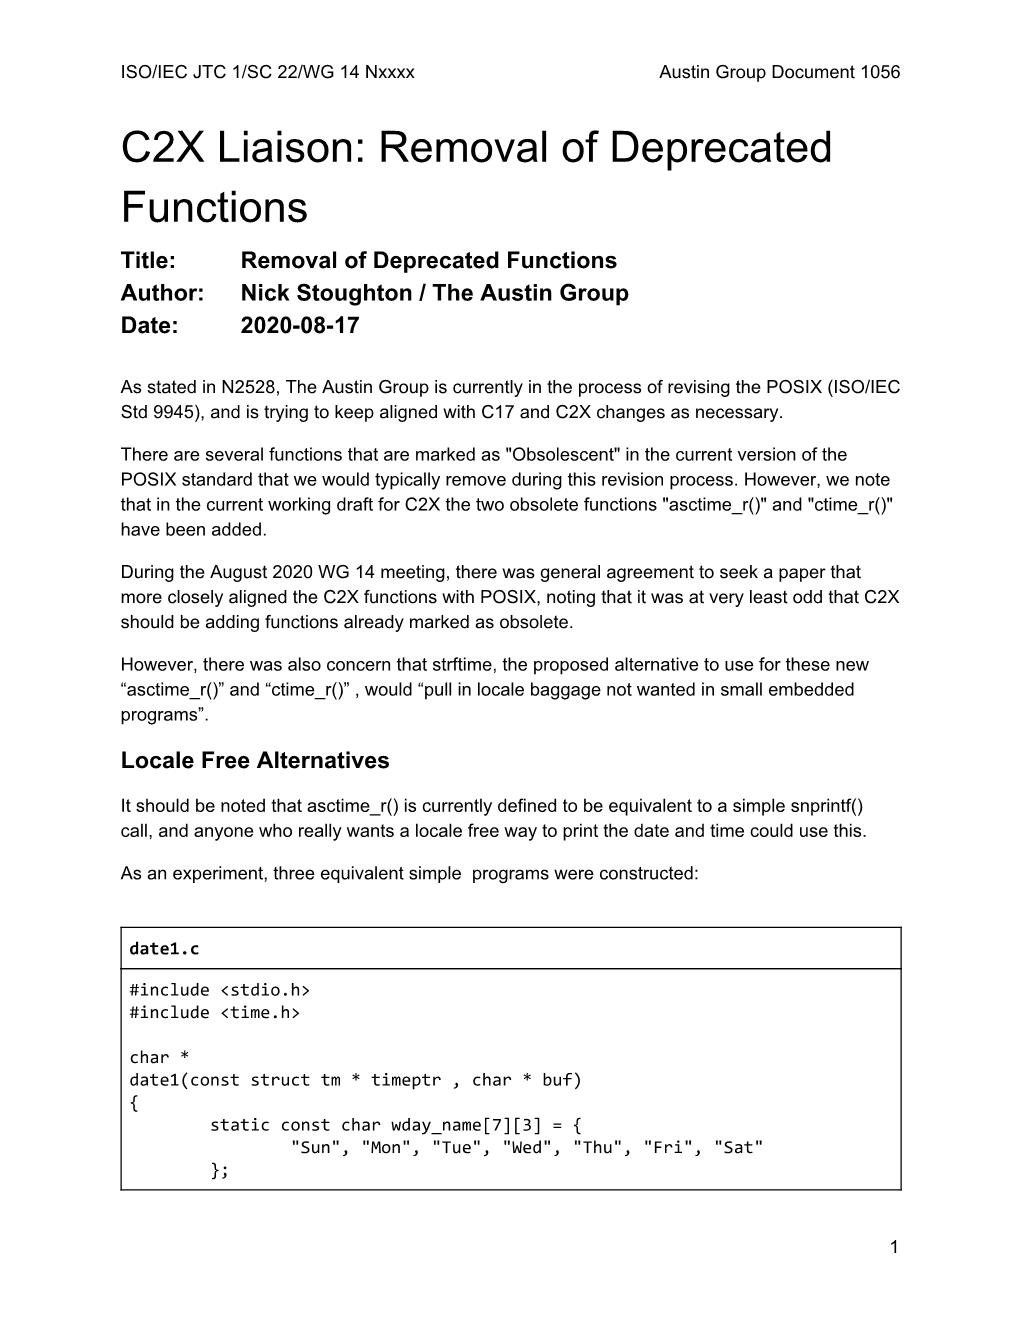 C2X Liaison: Removal of Deprecated Functions Title: Removal of Deprecated Functions Author: Nick Stoughton / the Austin Group Date: 2020-08-17